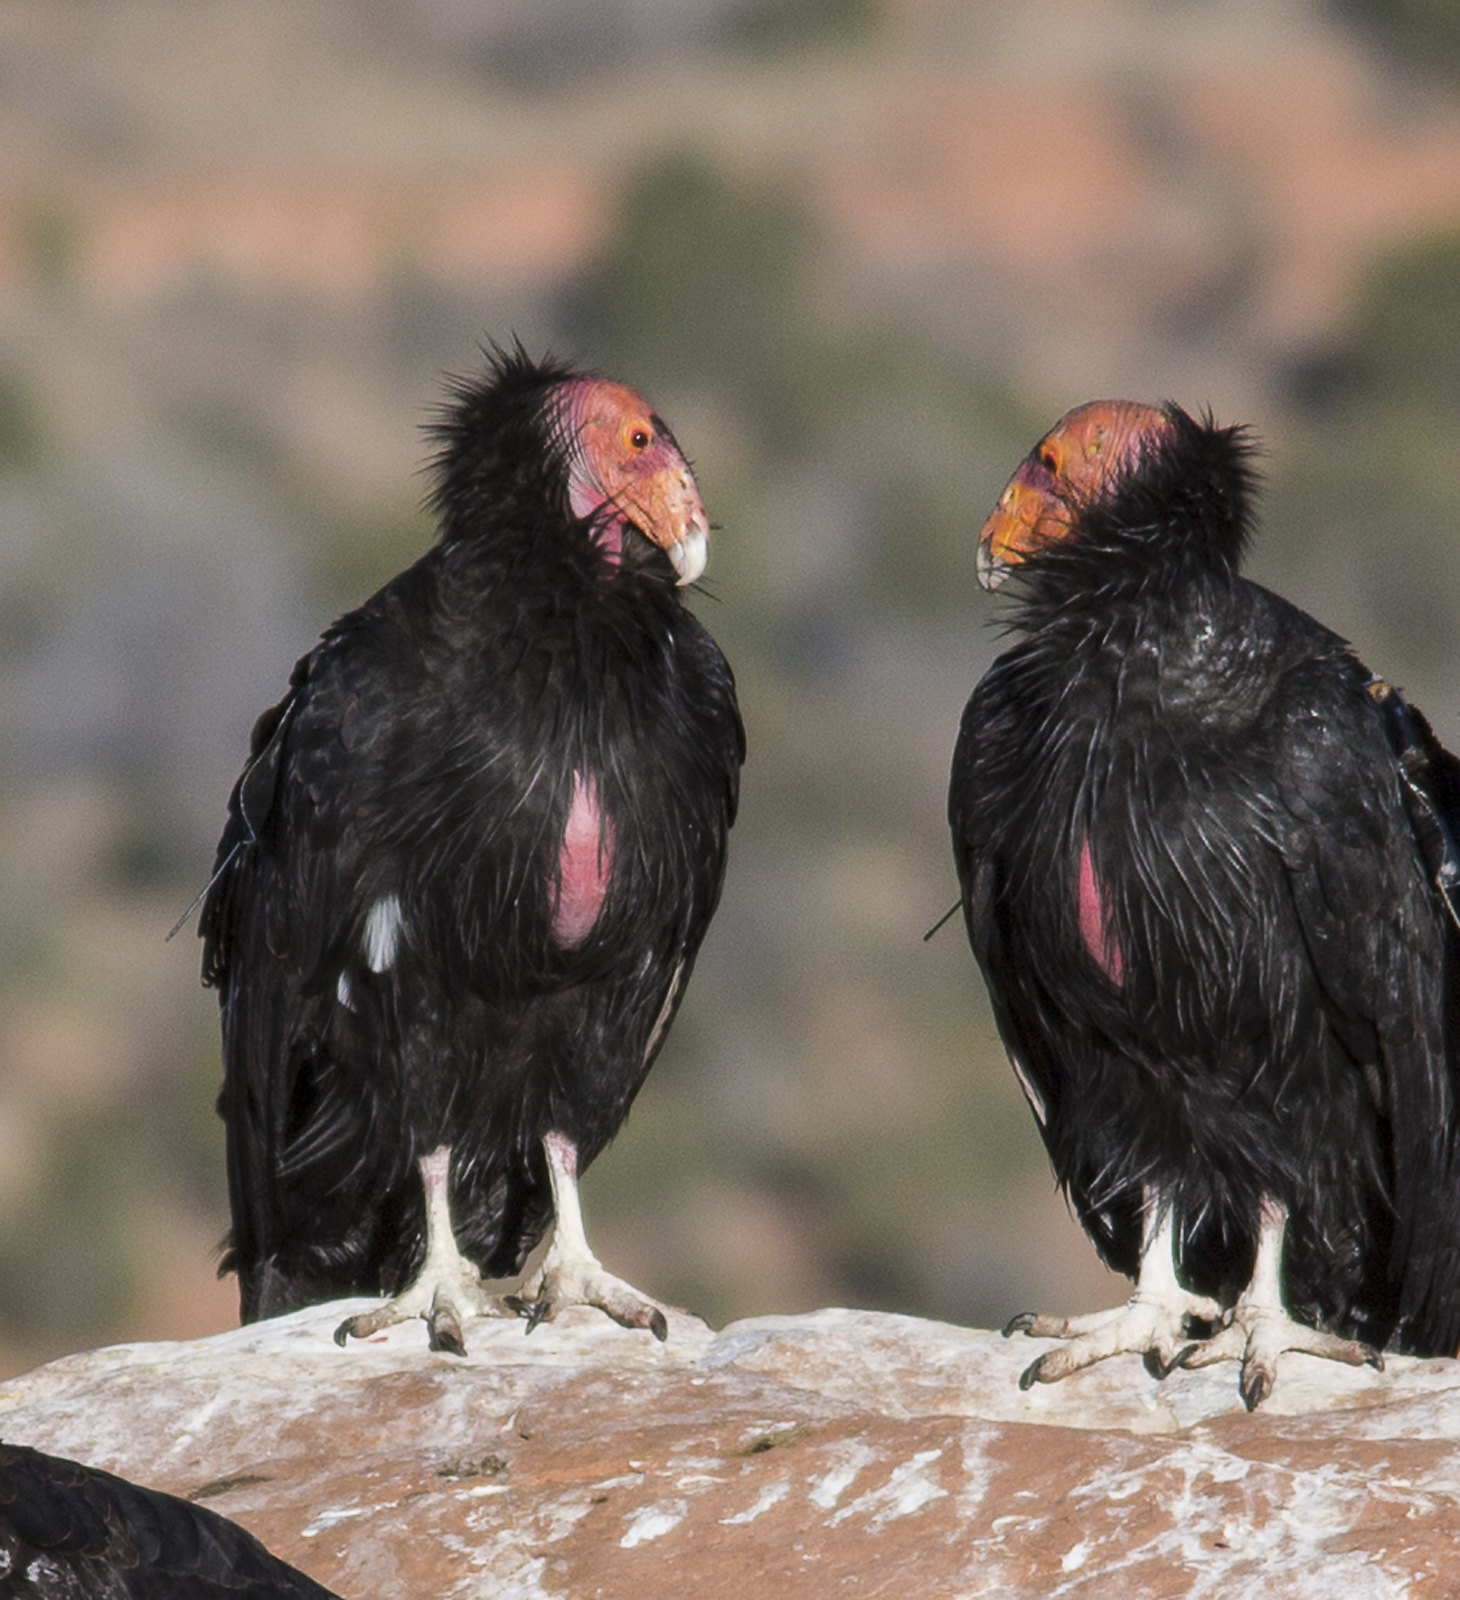 Two condors stand on a rock